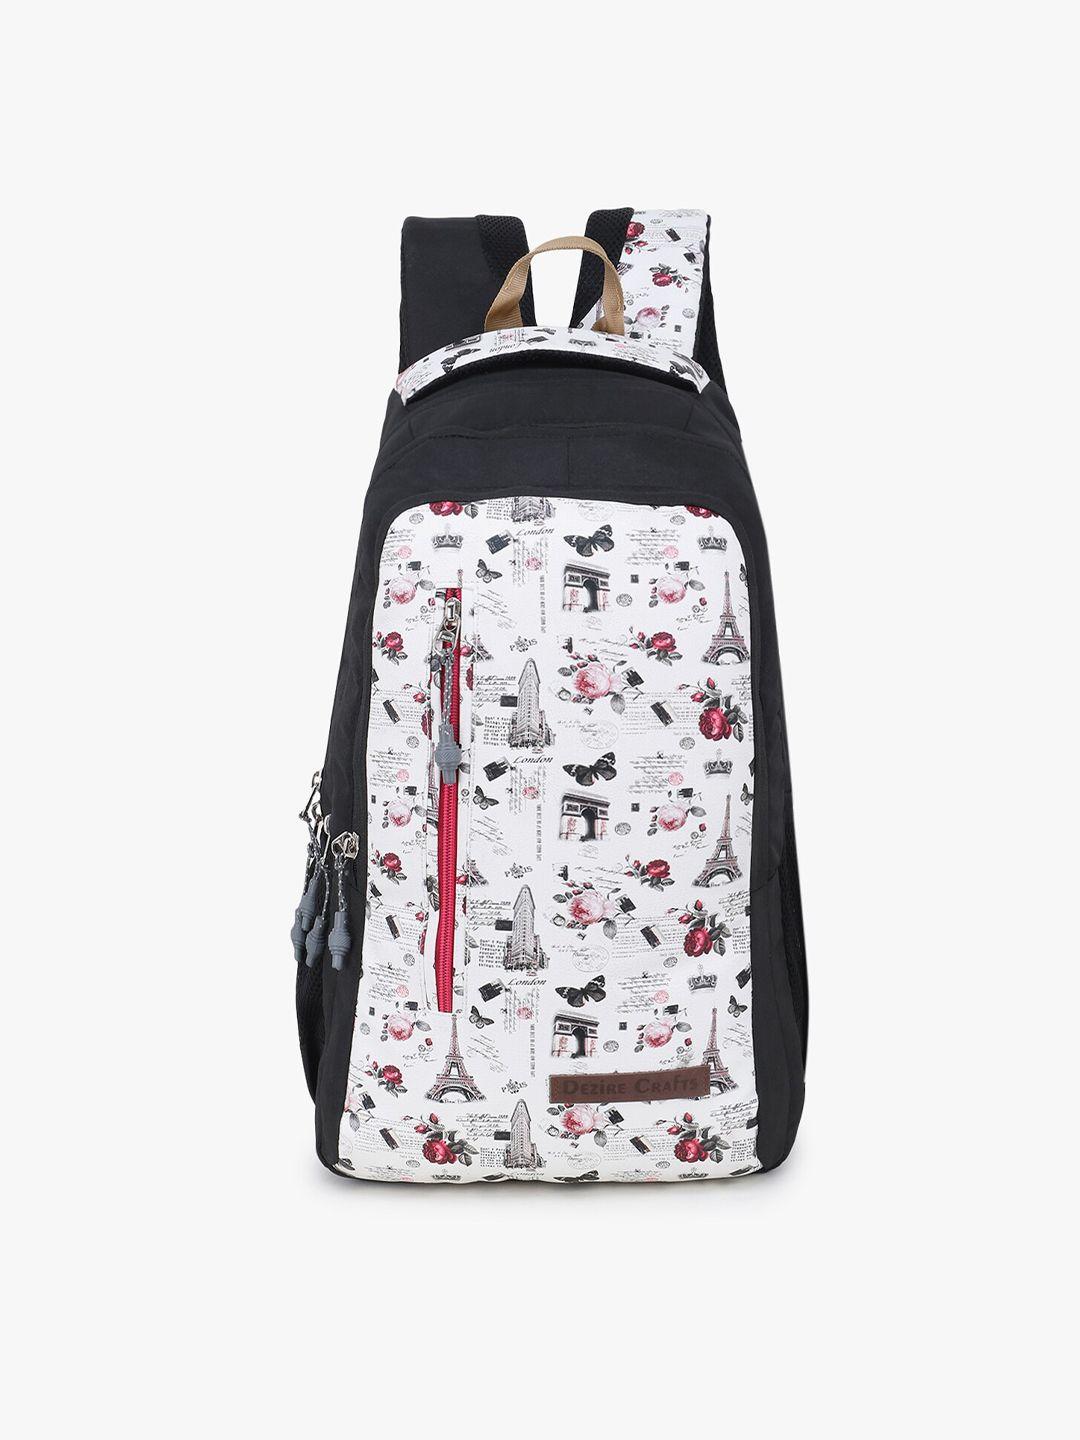 dezire crafts women white & black printed backpack